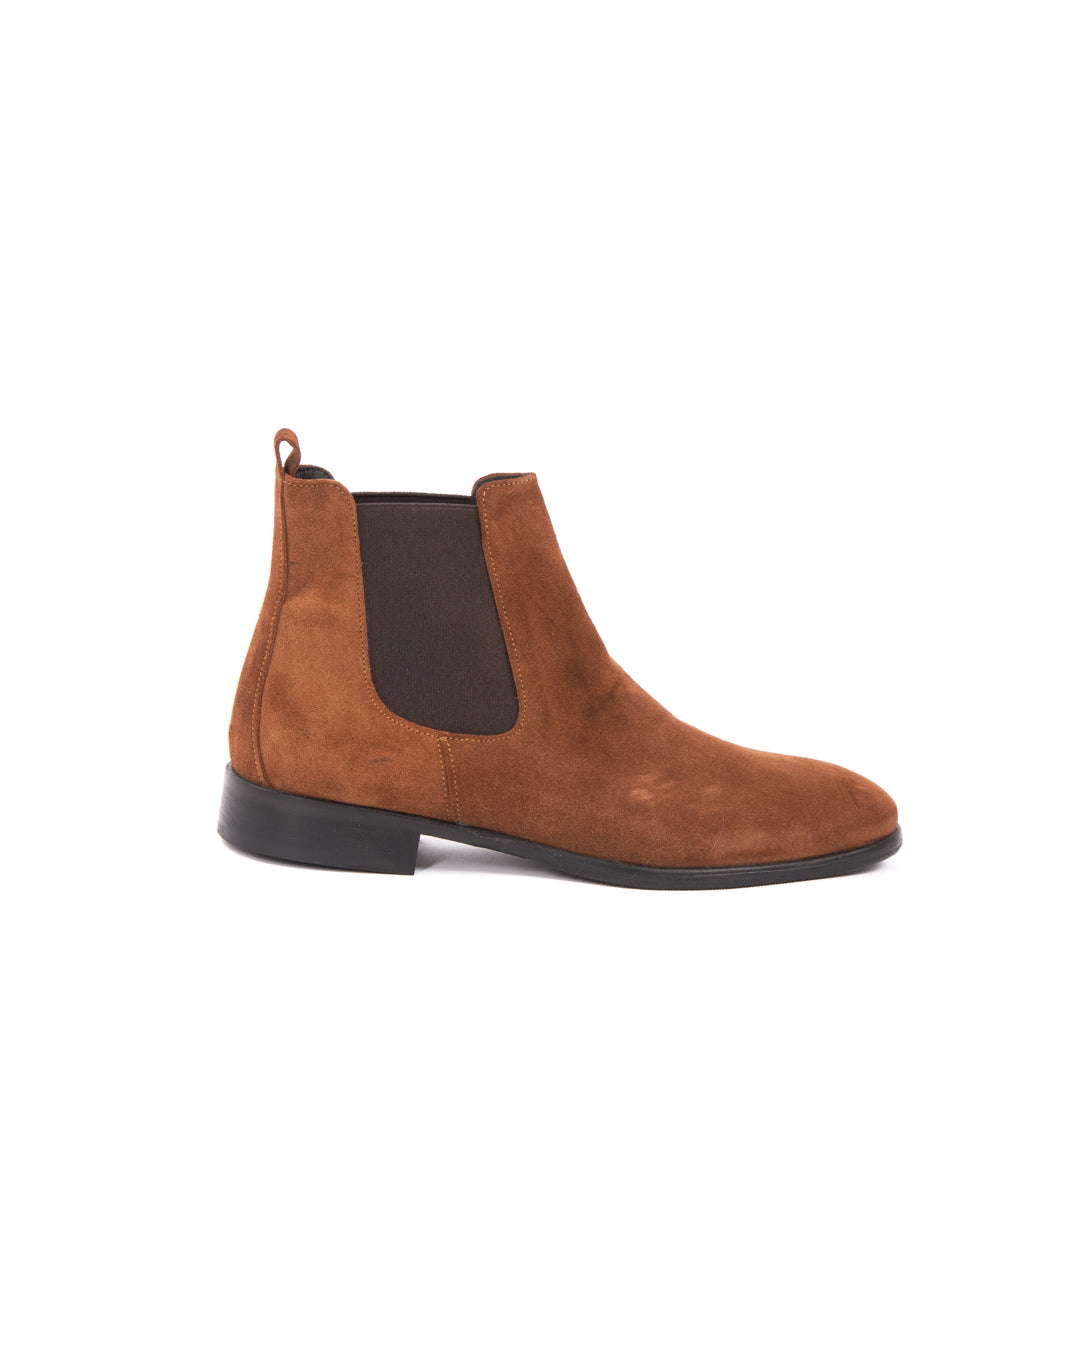 Dre - dirty terra suede chelsea boots